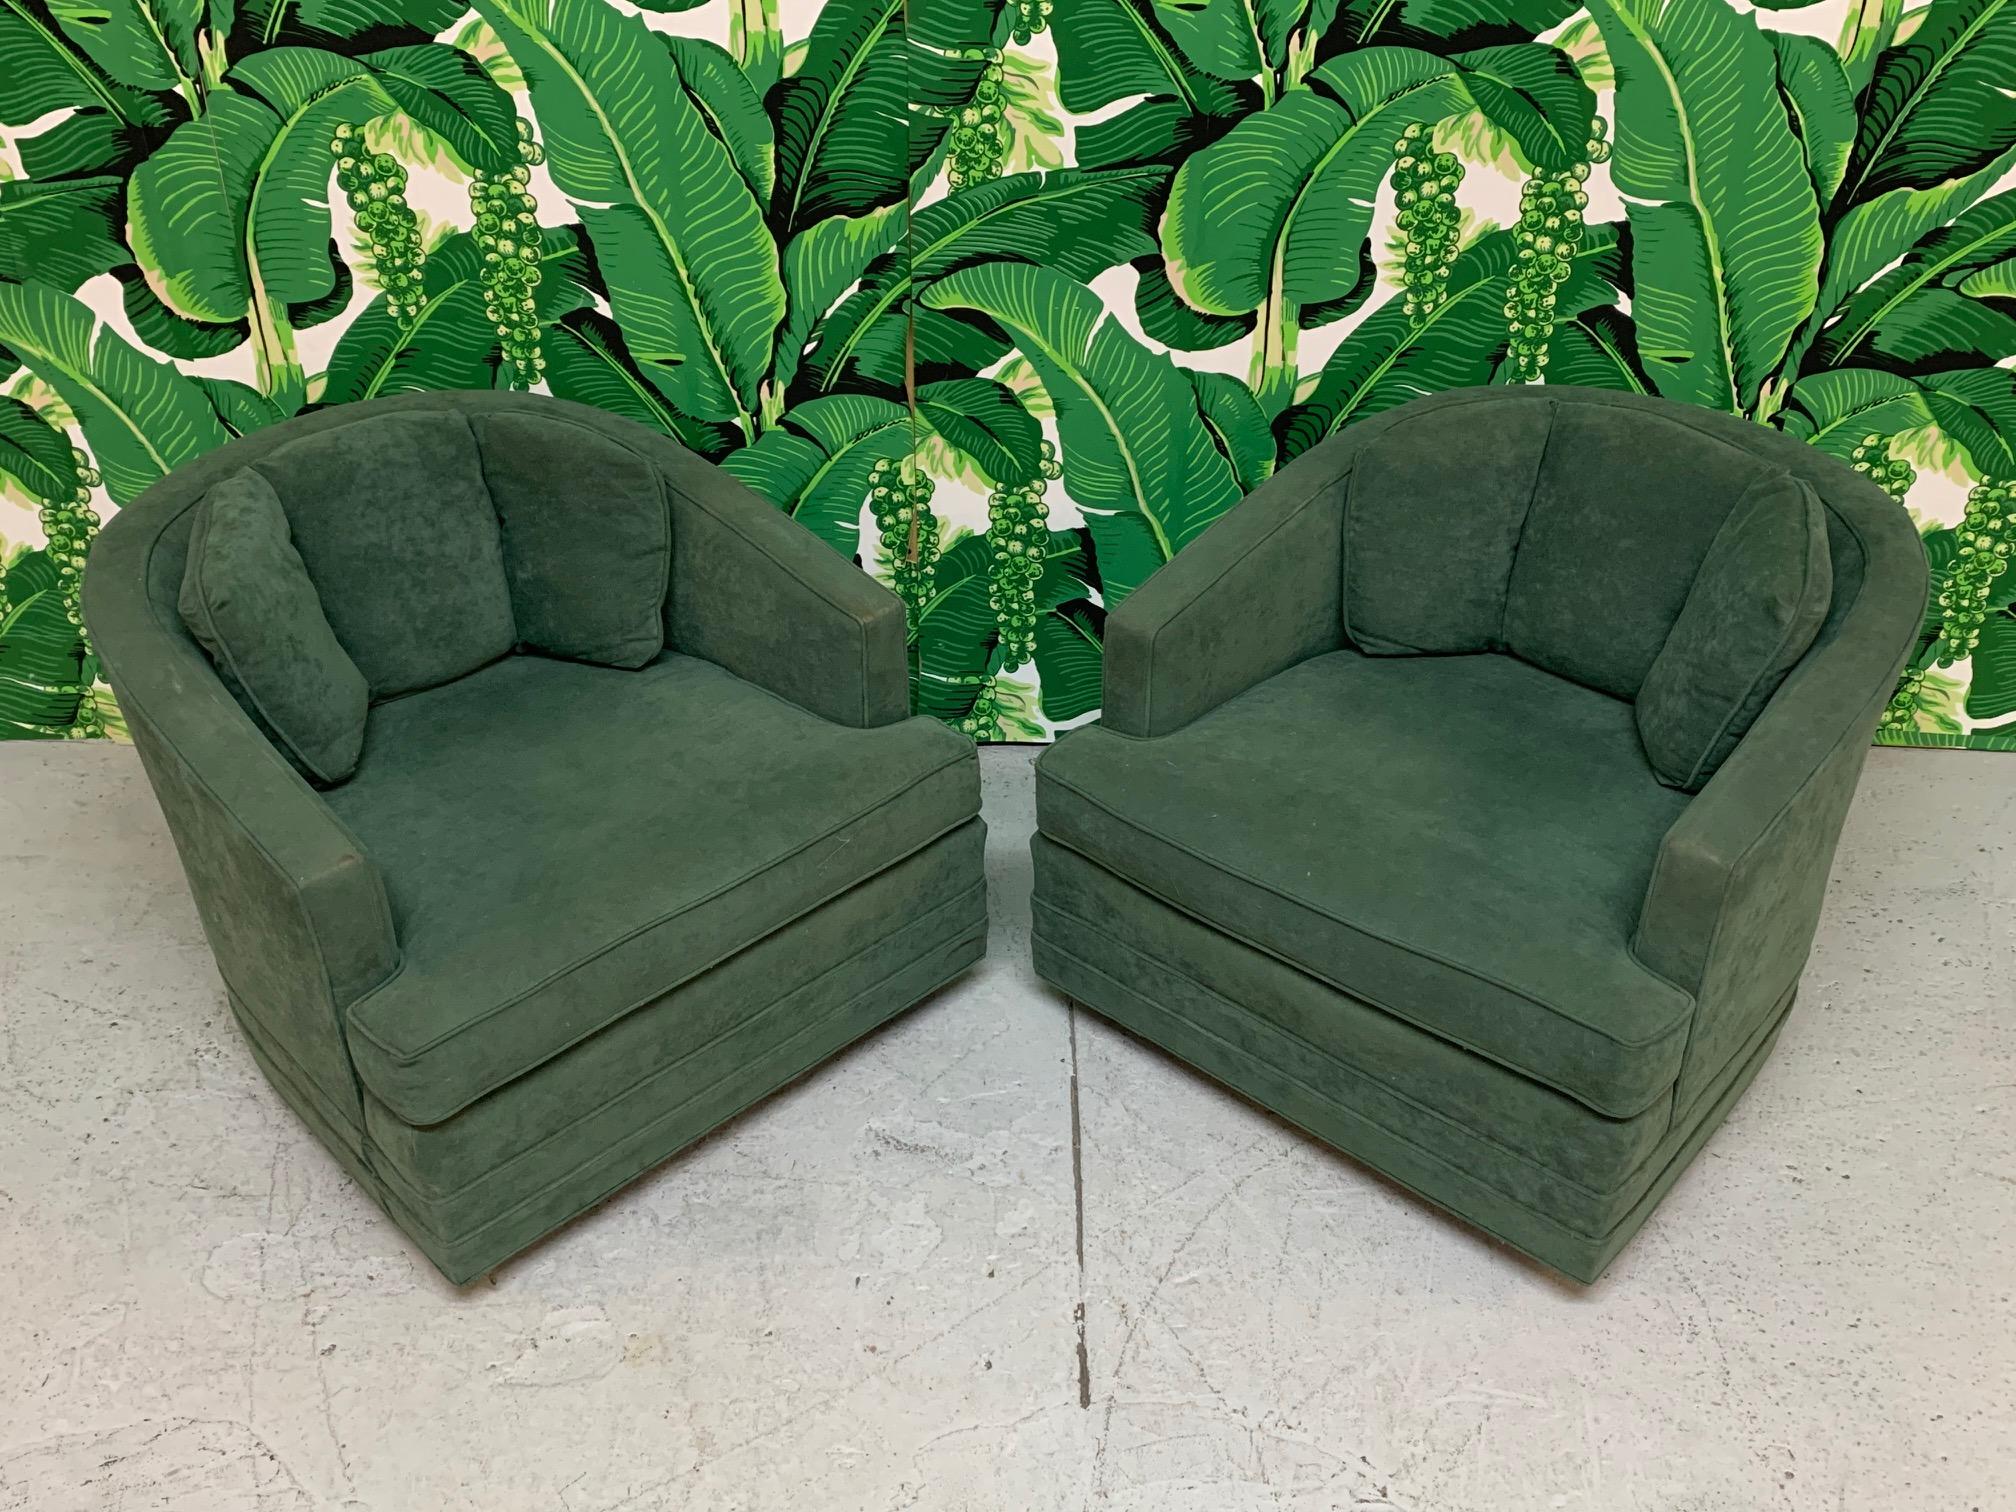 Pair of midcentury swivel chairs by Kaylyn feature dark green faux suede upholstery and low slung design. Good vintage condition with imperfections consistent with age. No holes, tears, or odors.